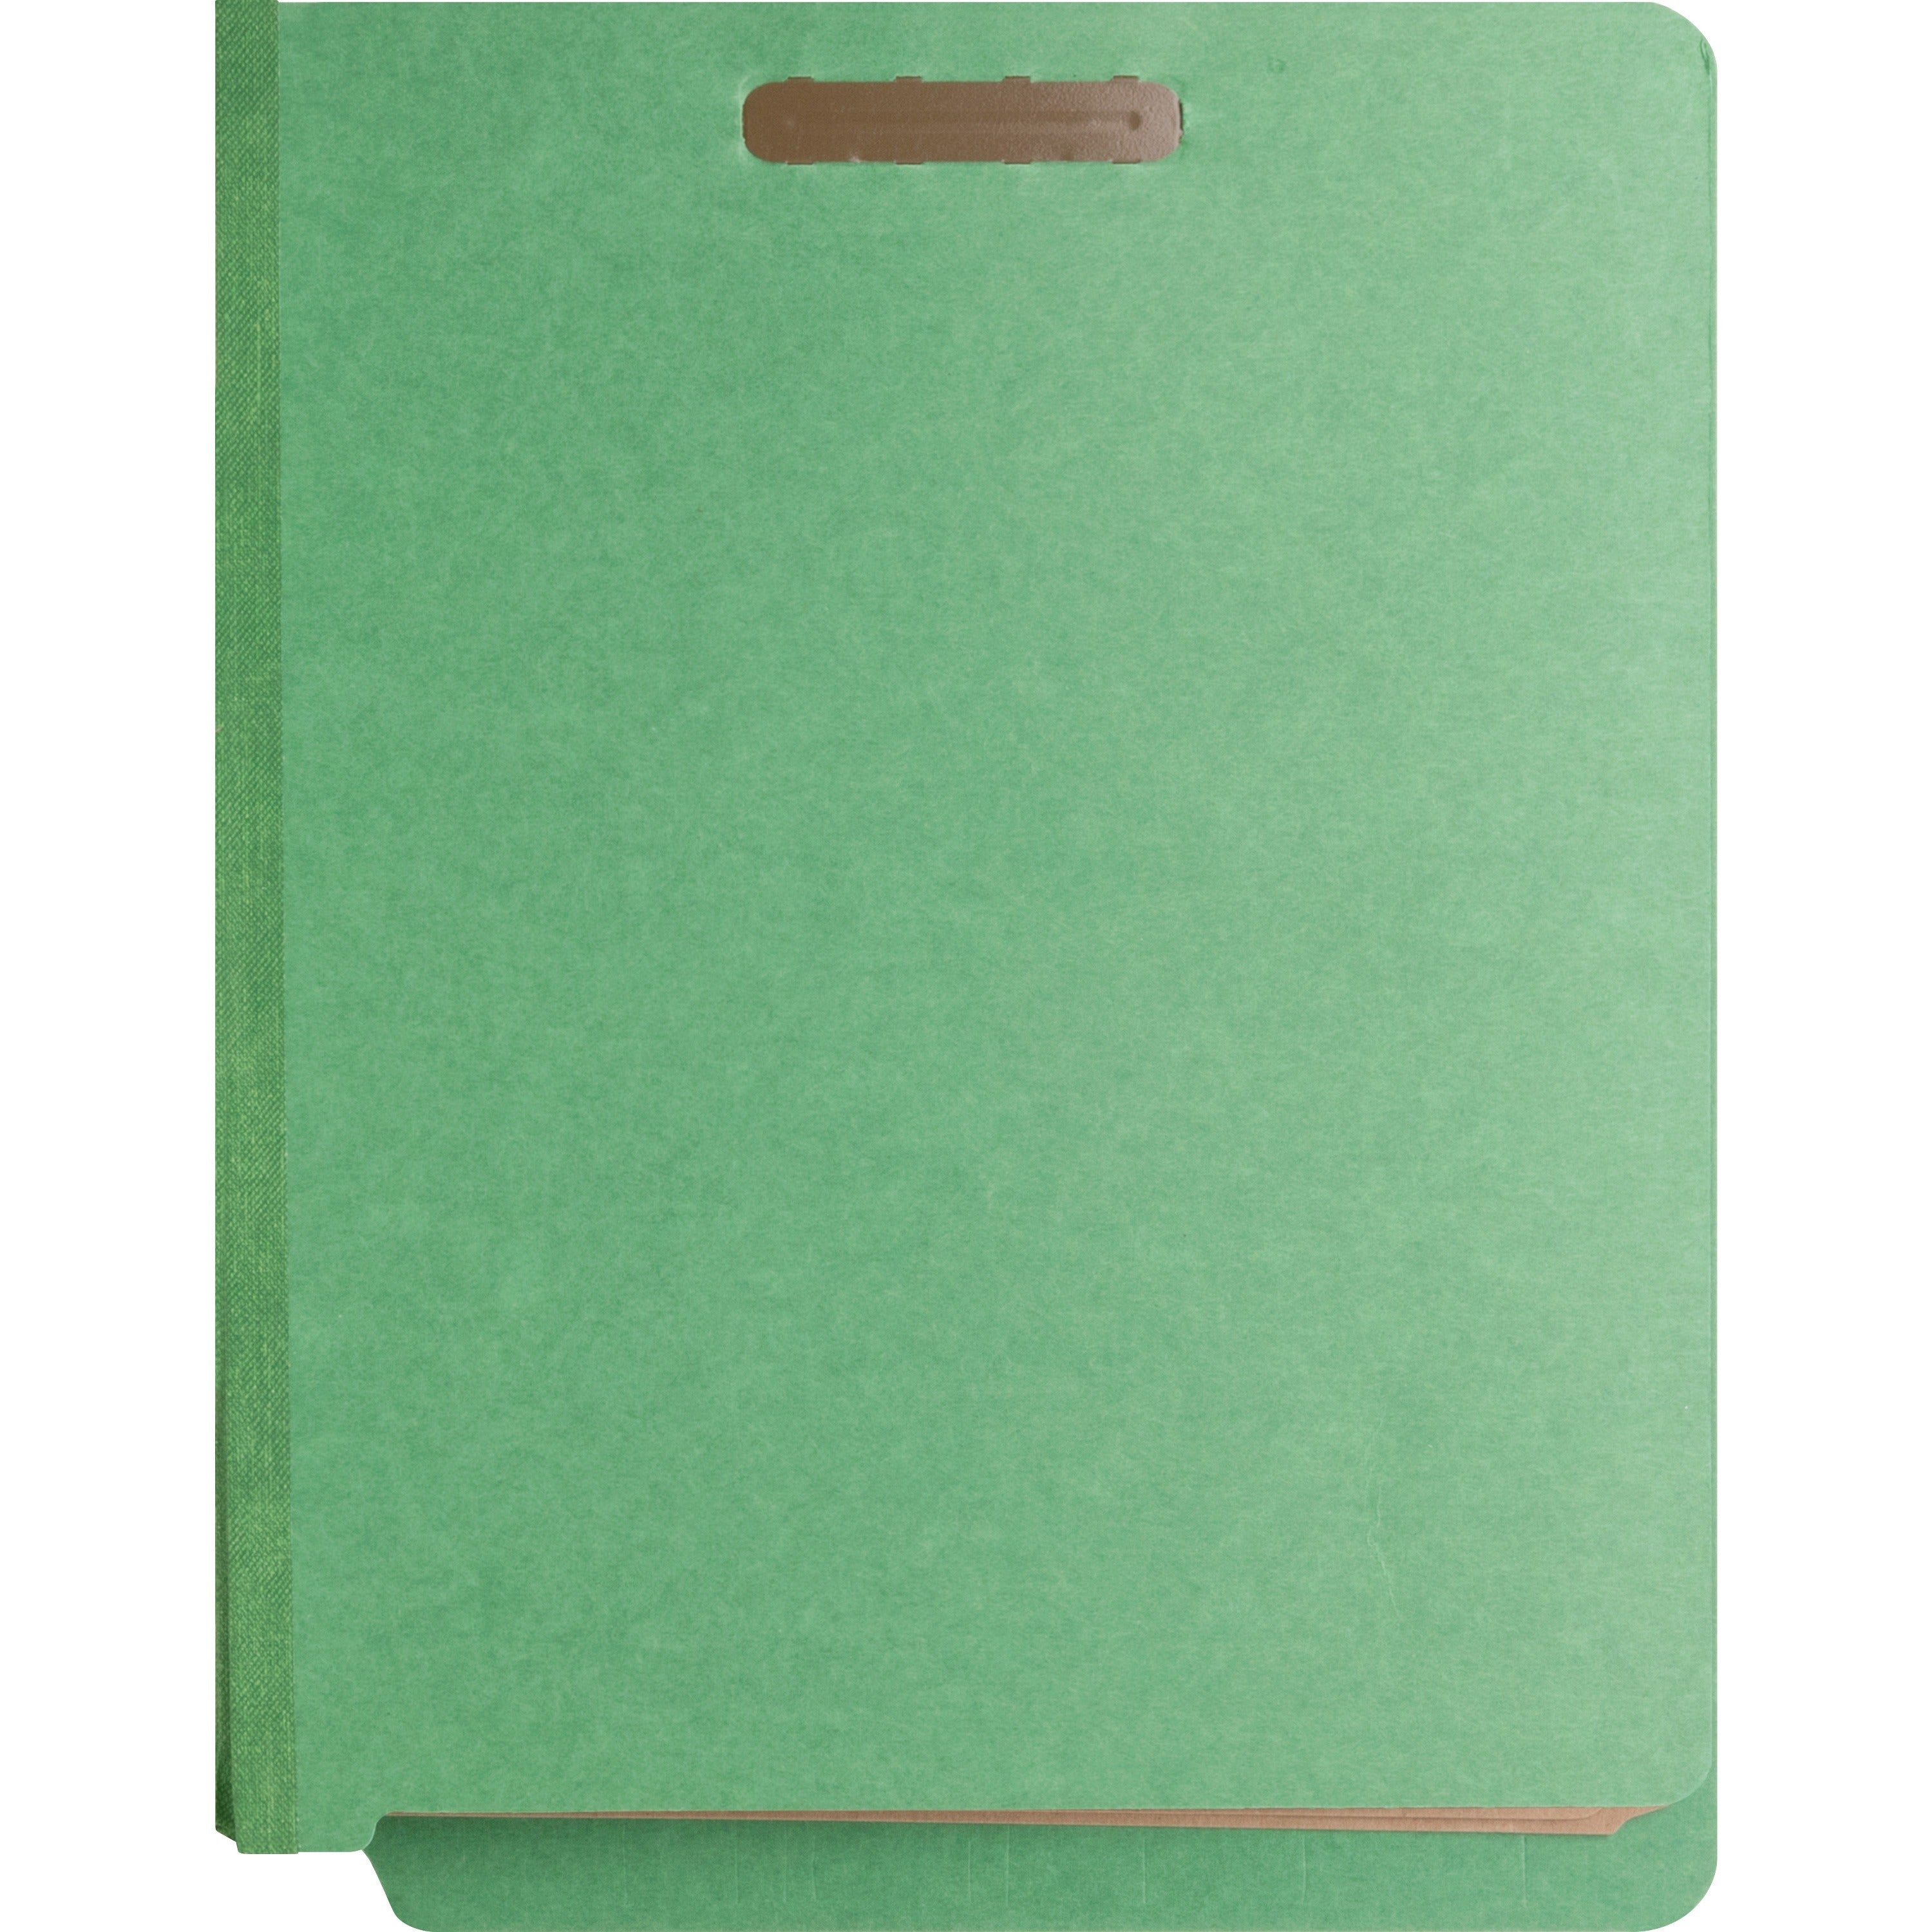 Nature Saver Letter Recycled Classification Folder - 8 1/2" x 11" - End Tab Location - 2 Divider(s) - Fiberboard - Green - 100% Recycled - 10 / Box - 